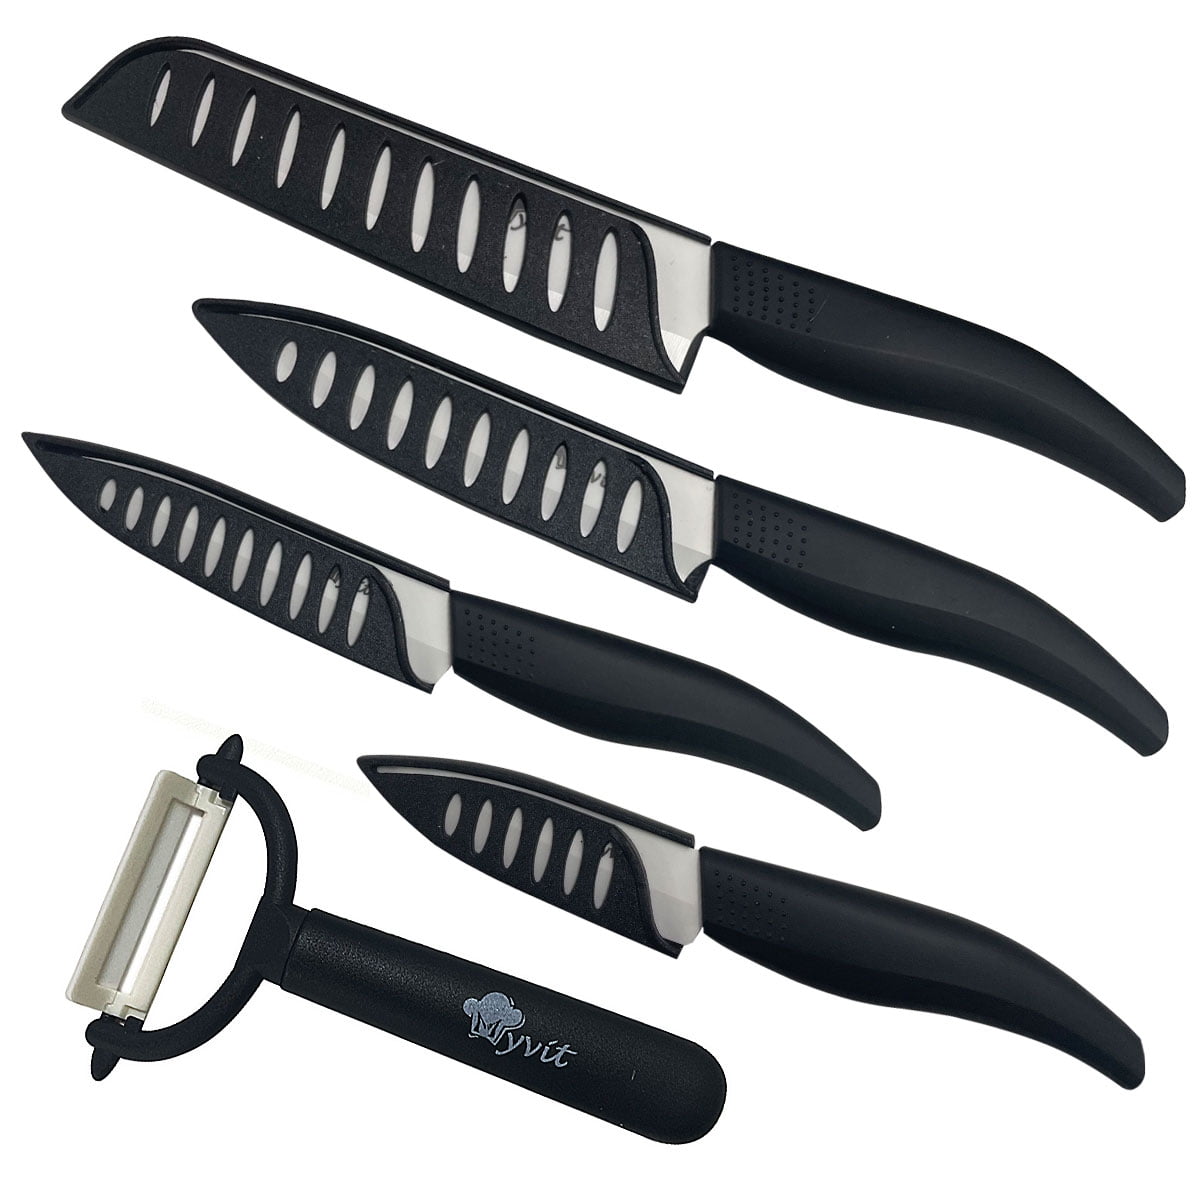 Ceramic Knives, 5-Pack Colorful Kitchen Knife Set, Non-Stick Professional Chef Knives with Acrylic Block, Cutlery Slicing Bread Knife with Fruit